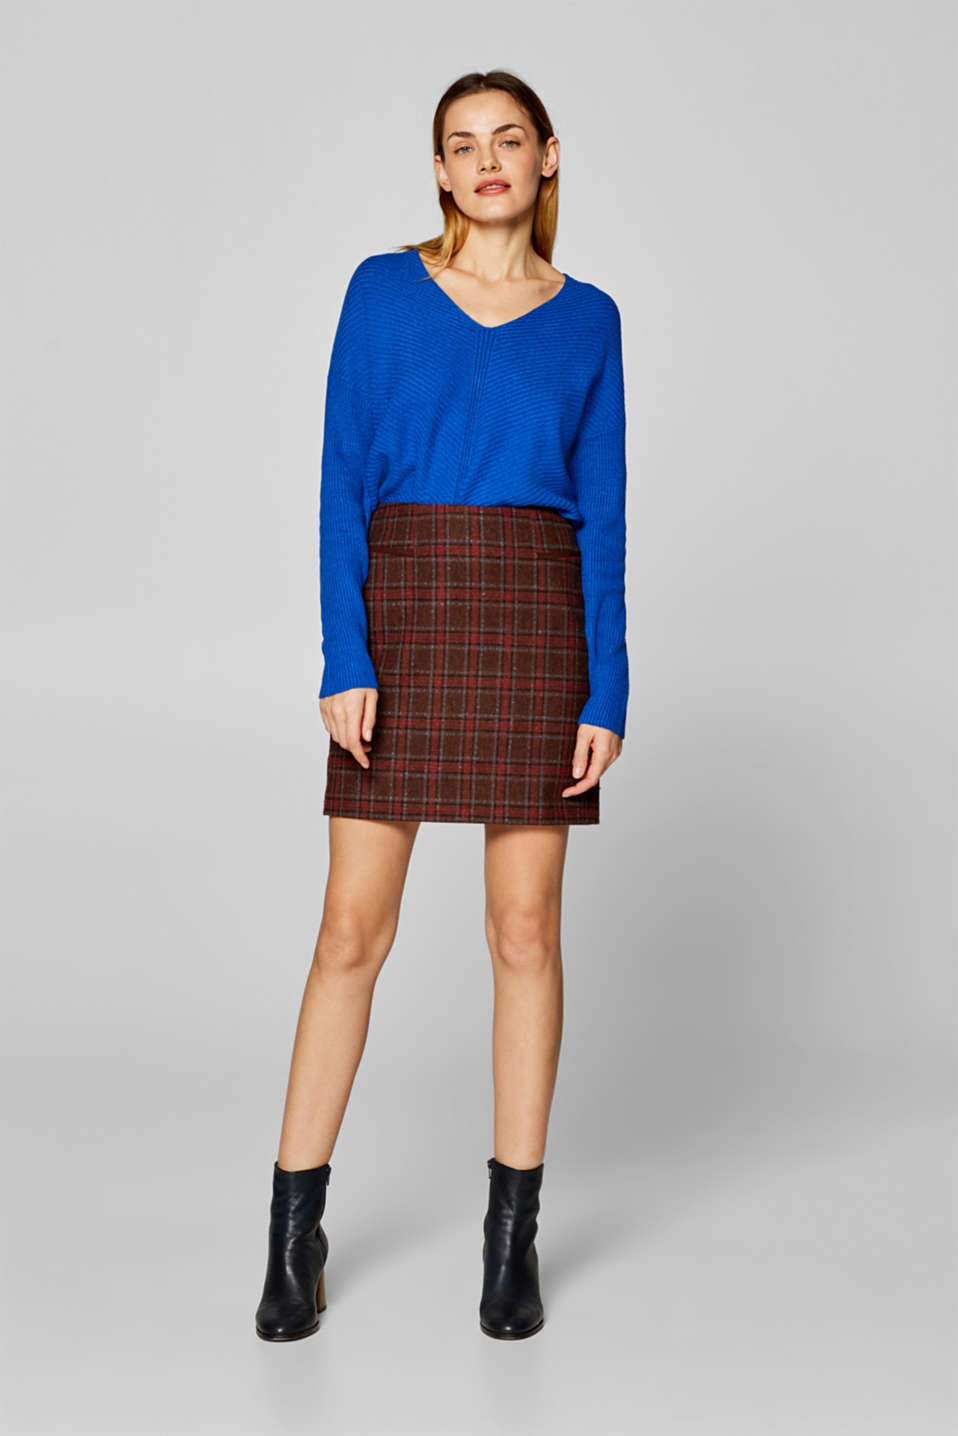 Esprit - Textured check skirt with wool at our Online Shop